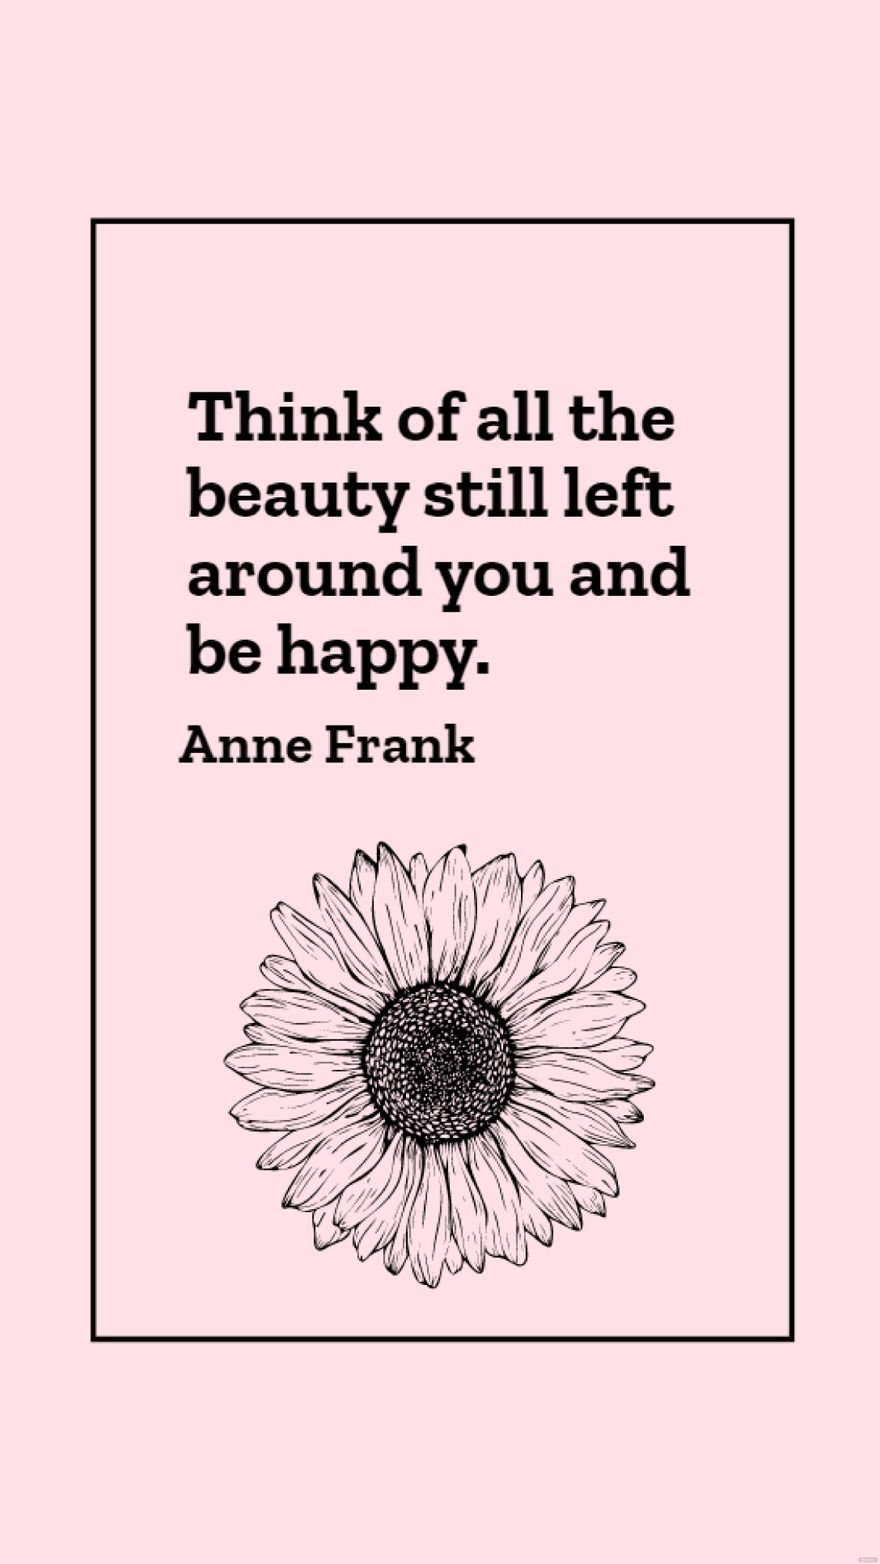 Free Anne Frank - Think of all the beauty still left around you and be happy. in JPG